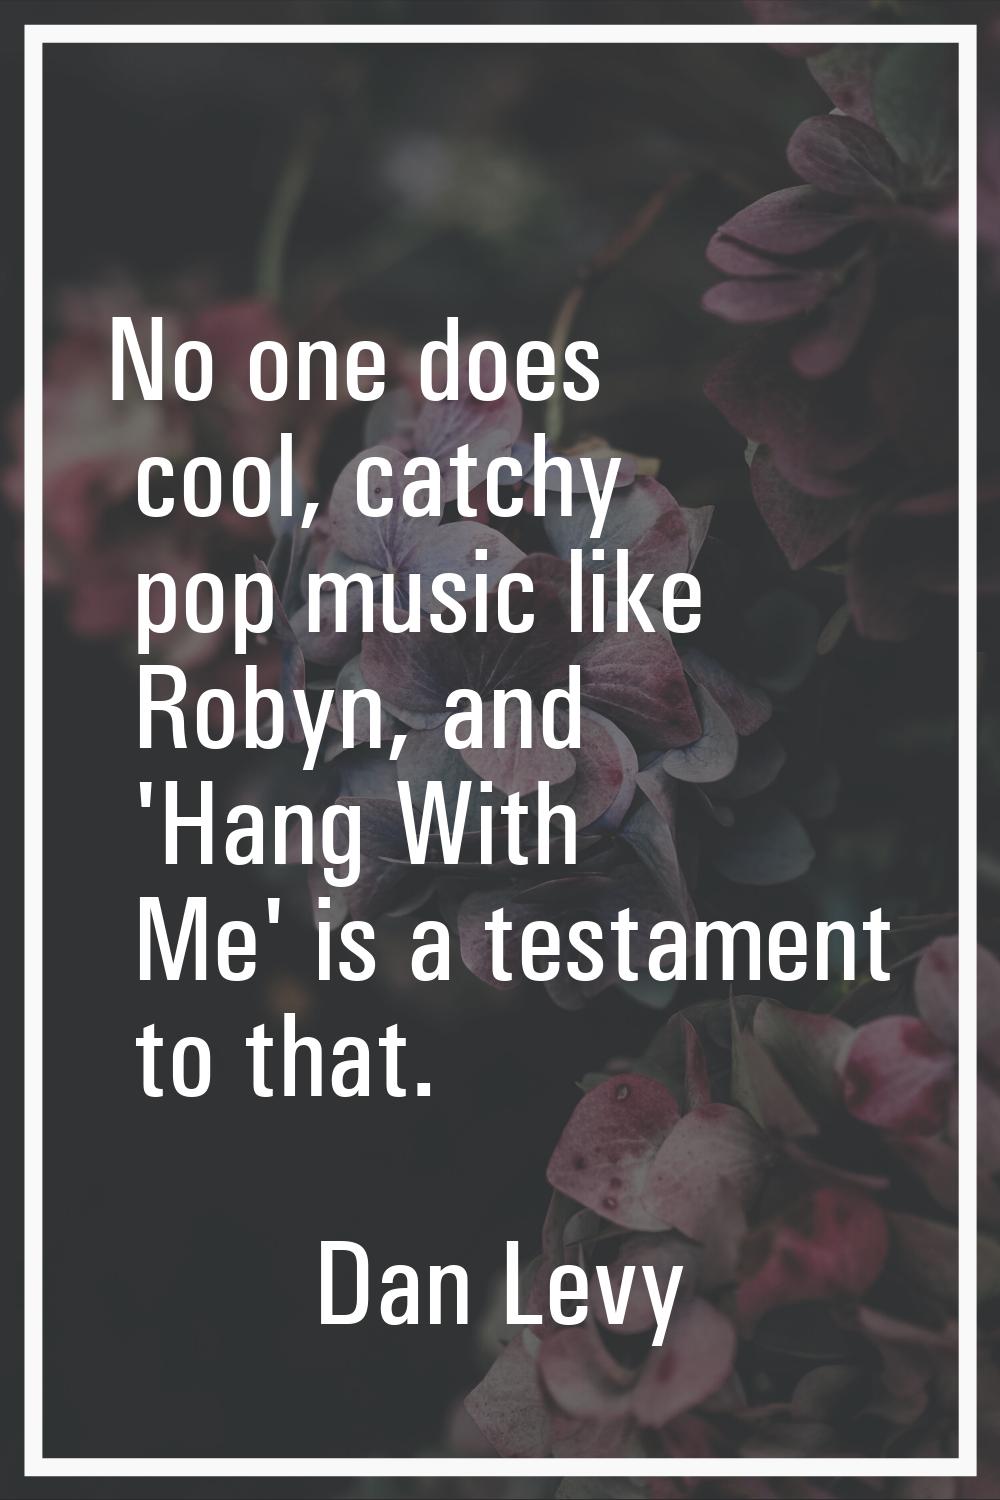 No one does cool, catchy pop music like Robyn, and 'Hang With Me' is a testament to that.